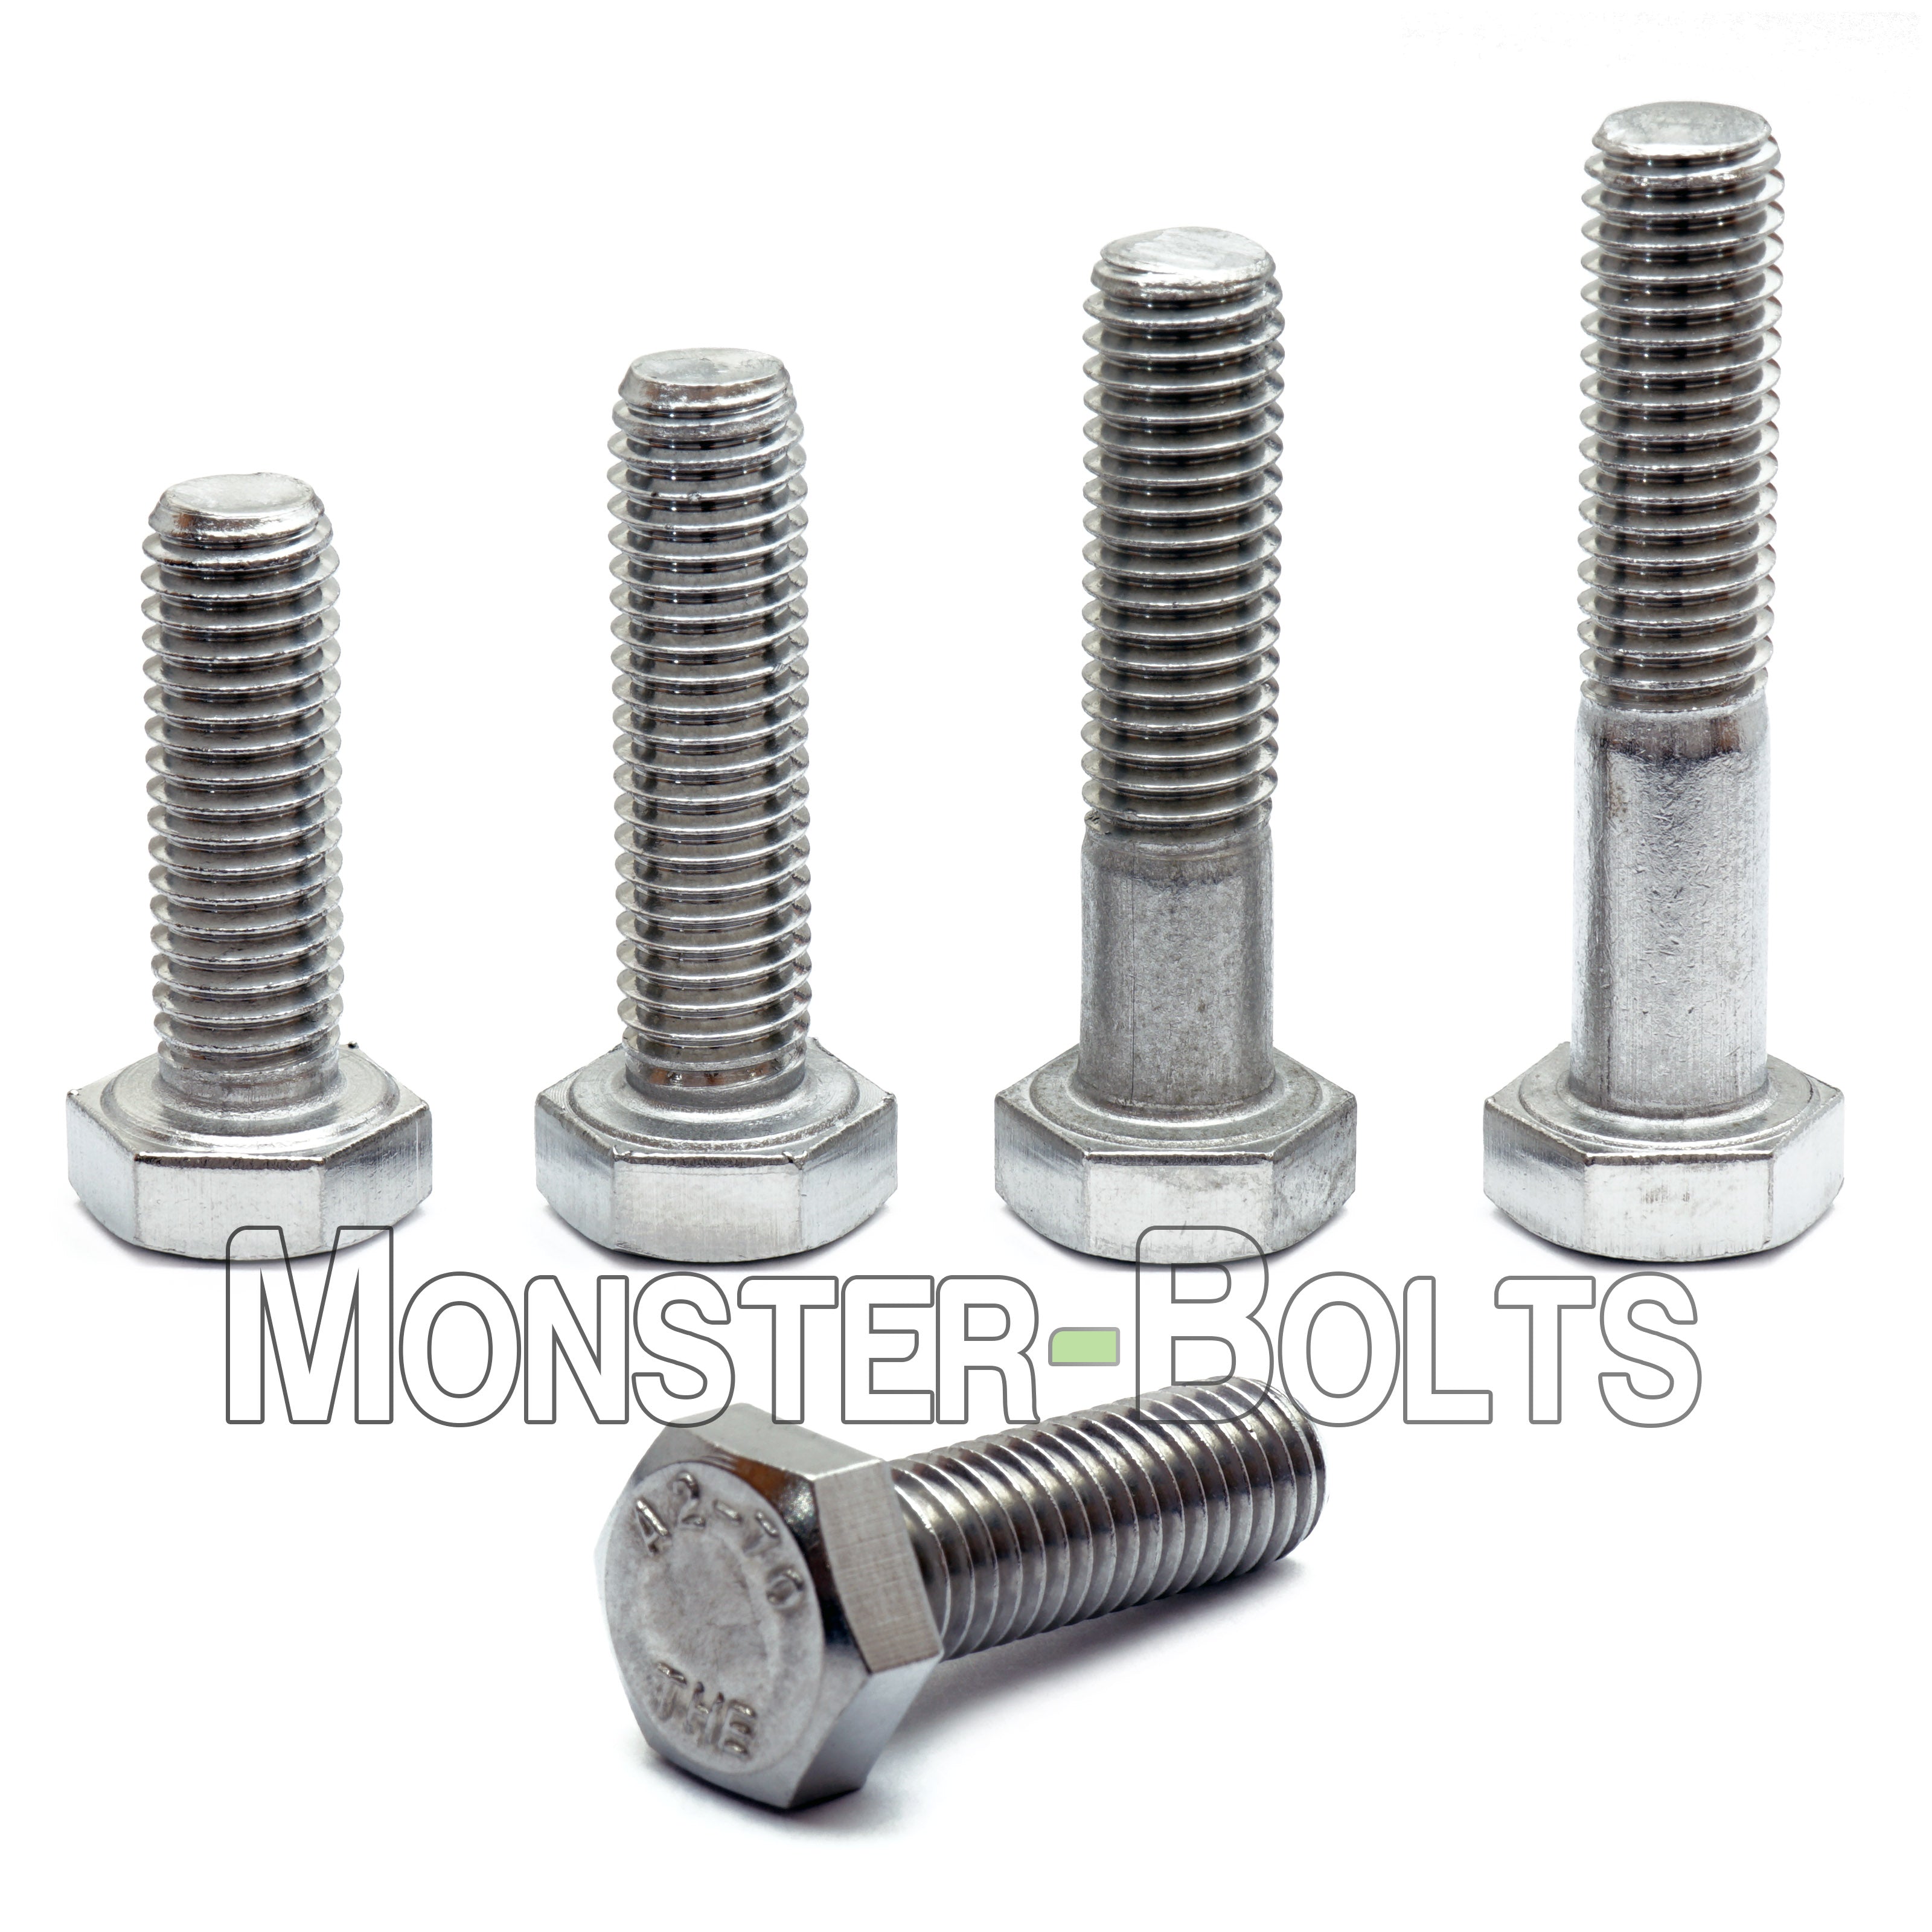 M6 FASTENERS CHOOSE FULLY THREADED SCREWS,NUTS OR WASHERS STAINLESS STEEL BOLTS 